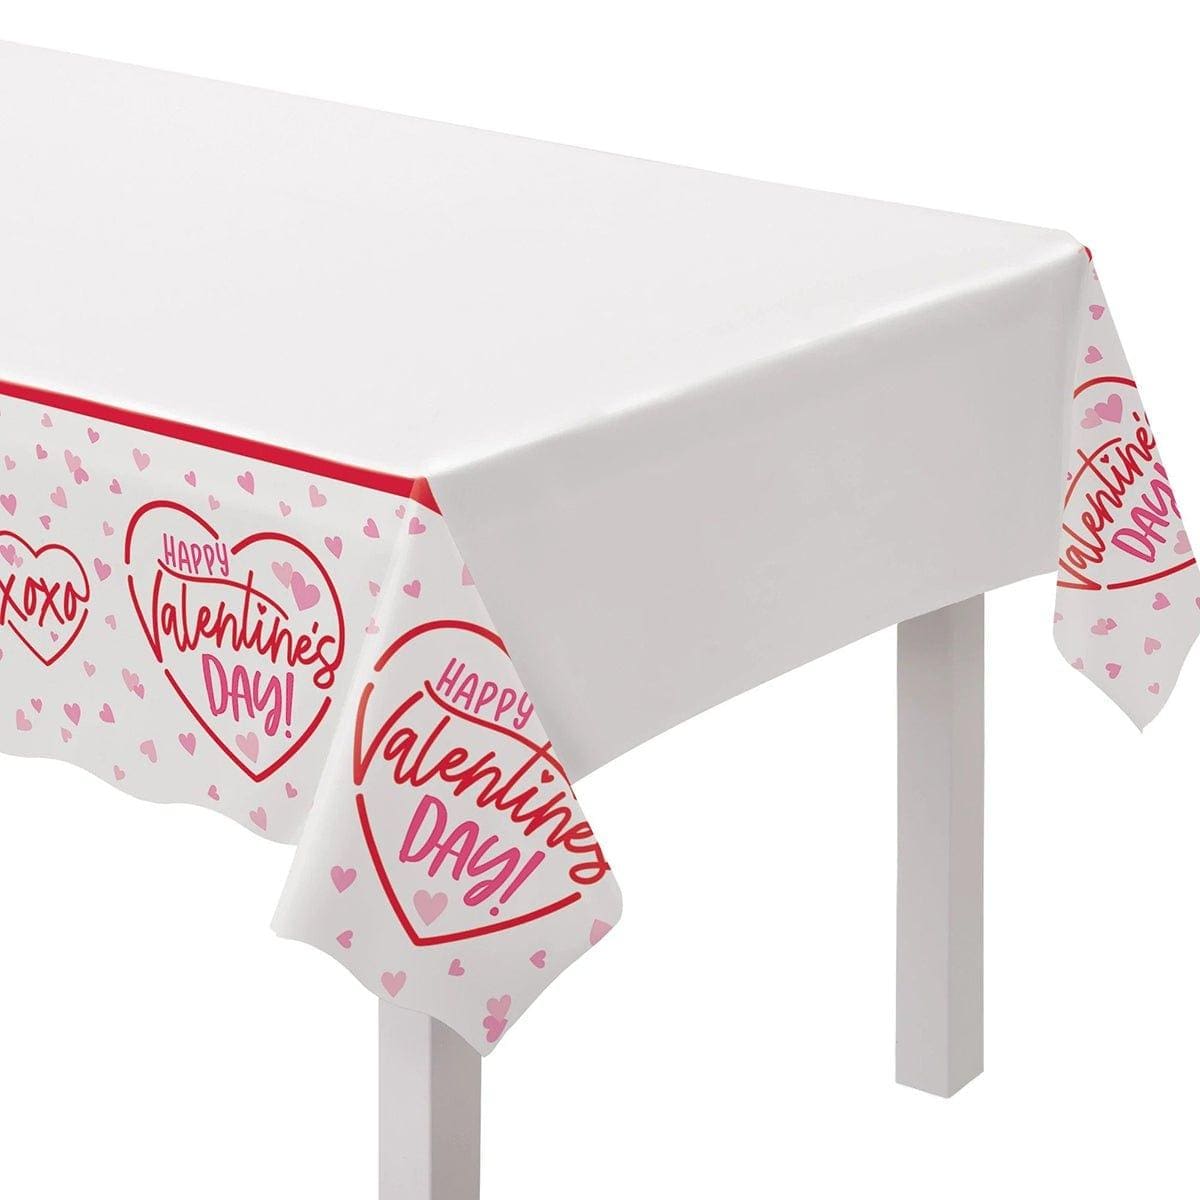 AMSCAN CA Valentine's Day Cross My Heart Plastic Tablecover